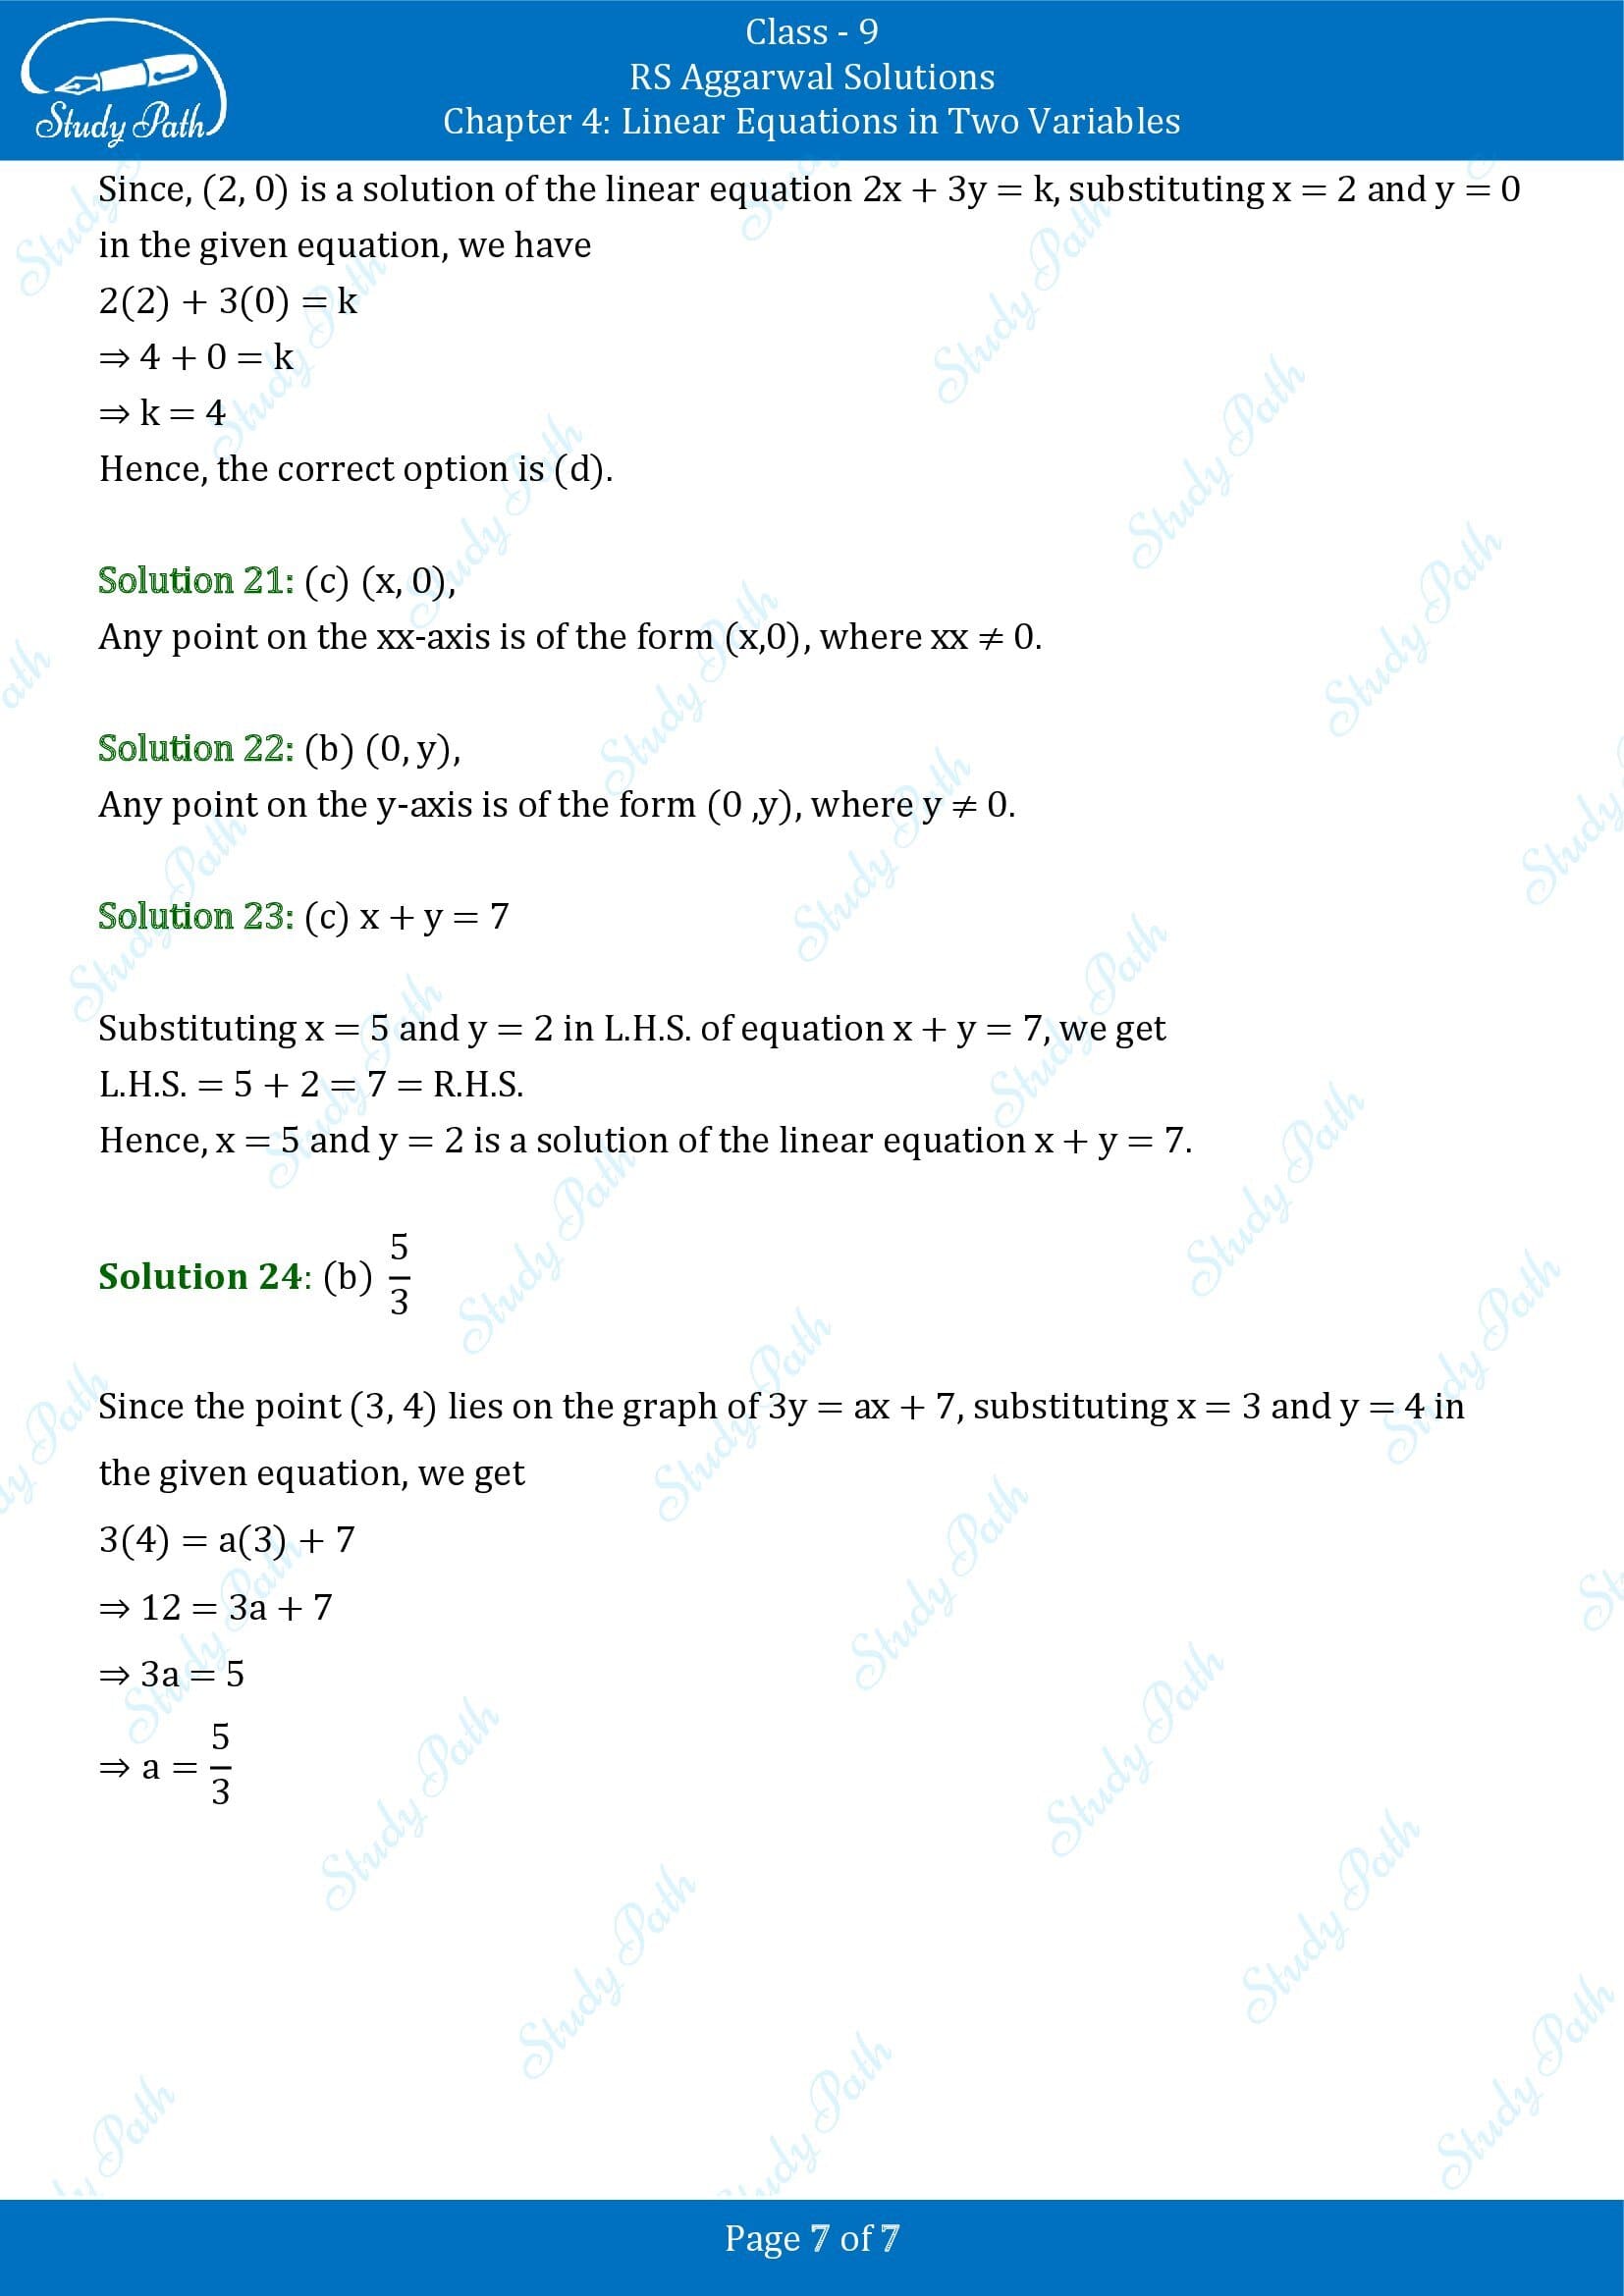 RS Aggarwal Solutions Class 9 Chapter 4 Linear Equations in Two Variables Multiple Choice Questions MCQs 00007